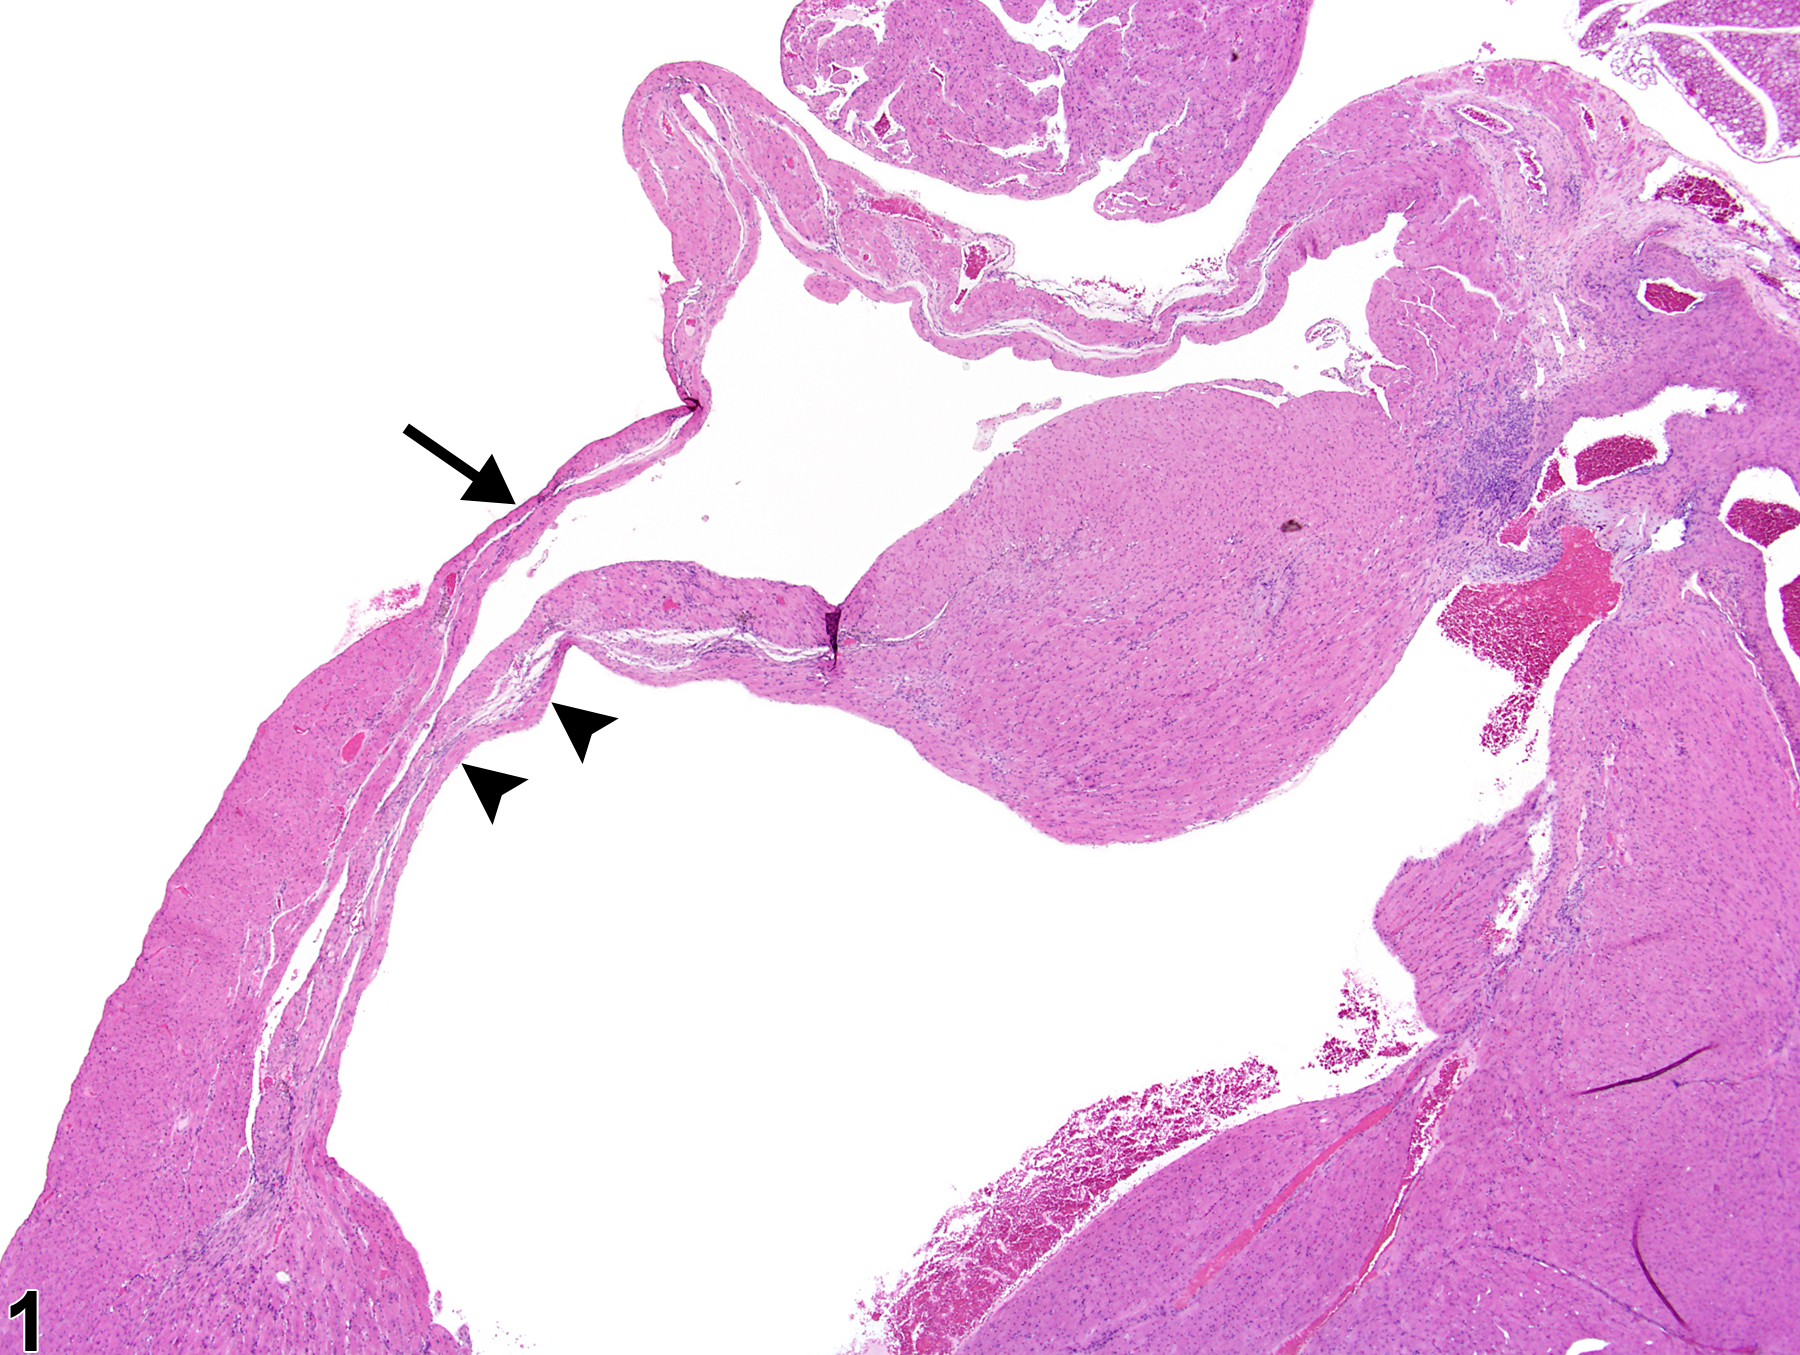 Image of atrophy in the heart from a male B6C3F1/N mouse in a chronic study